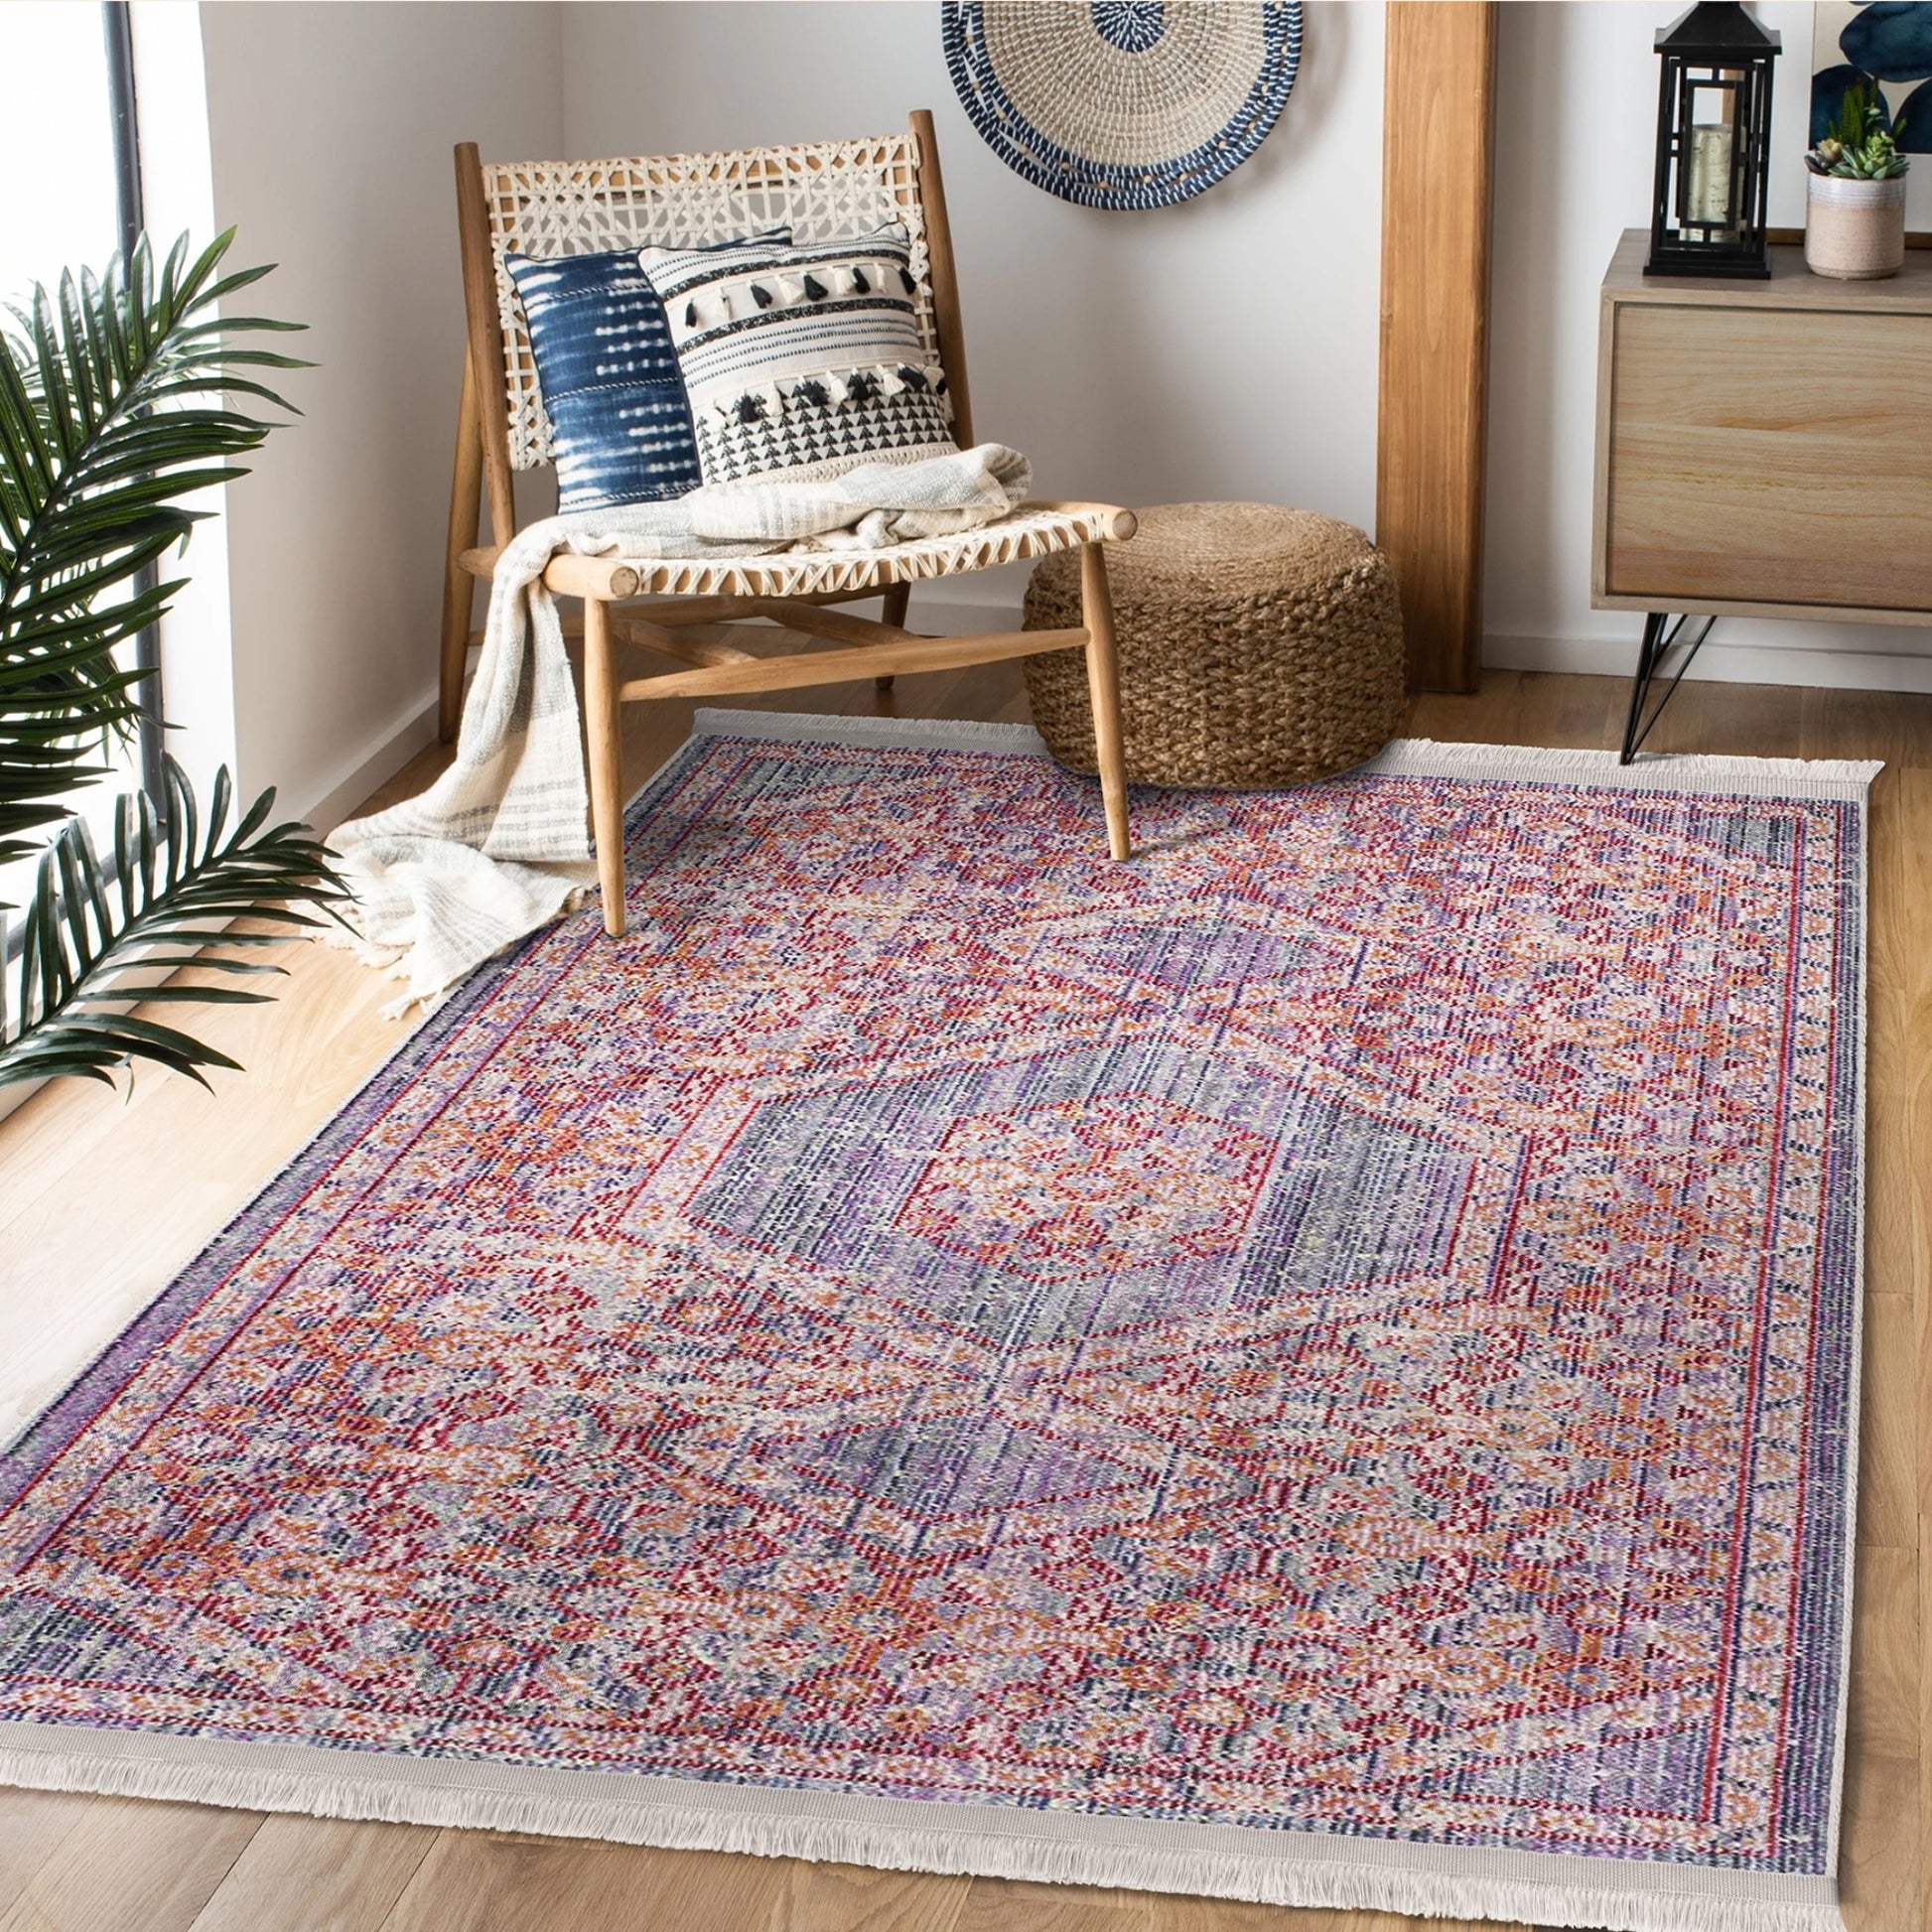 Classic Persian Rug for a Stylish Living Space